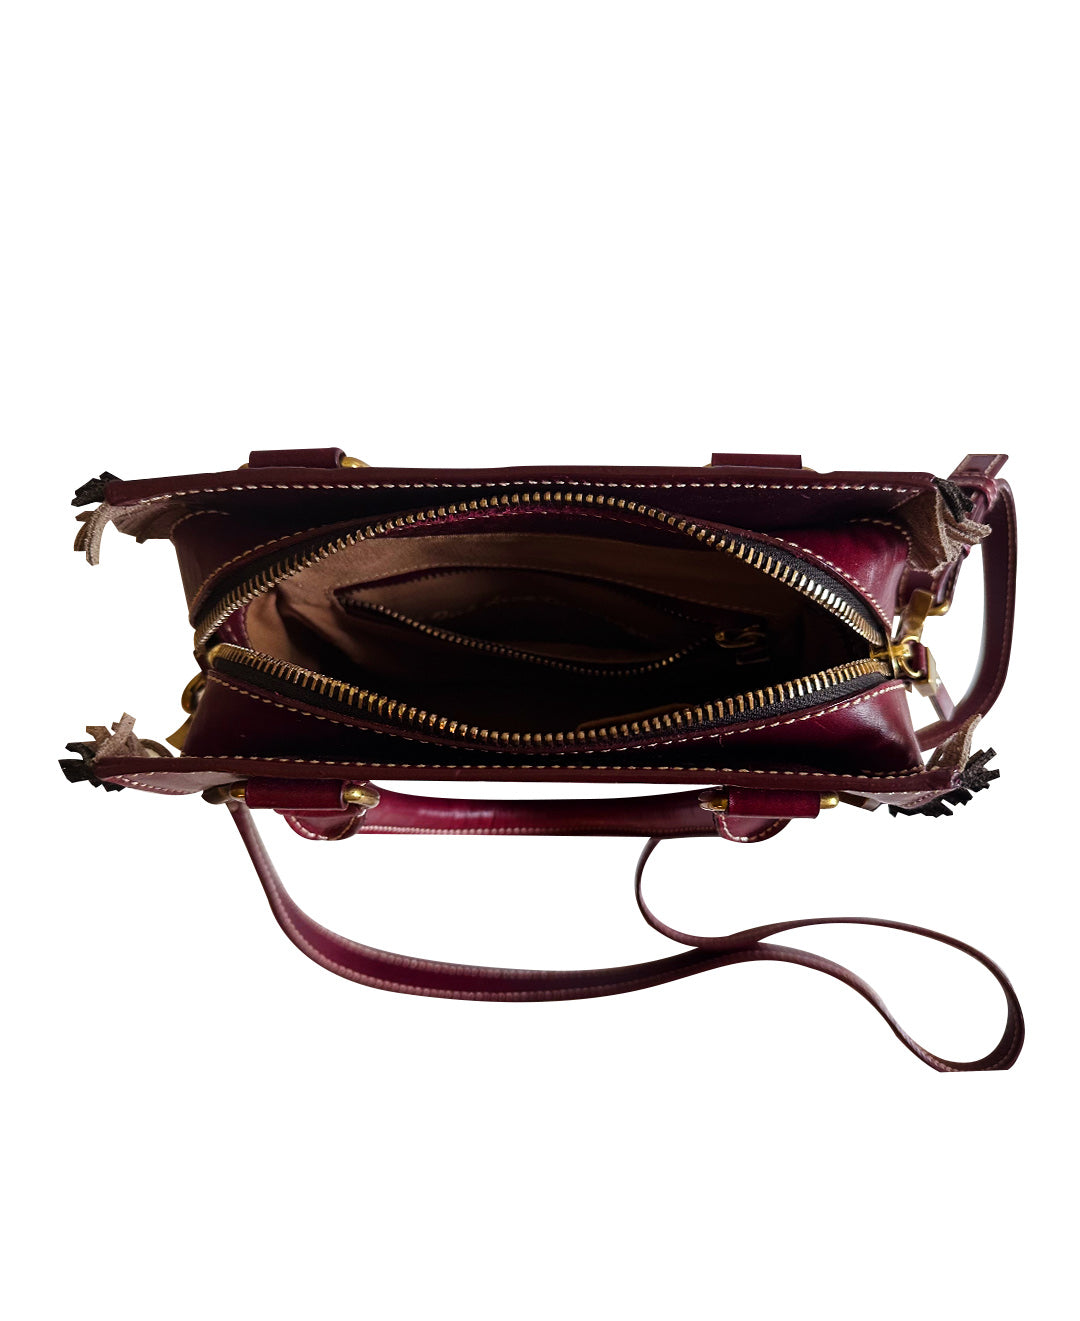 Second Chance Crossbody: Unique Pre-Owned Leather Handbag | Sustainable Style